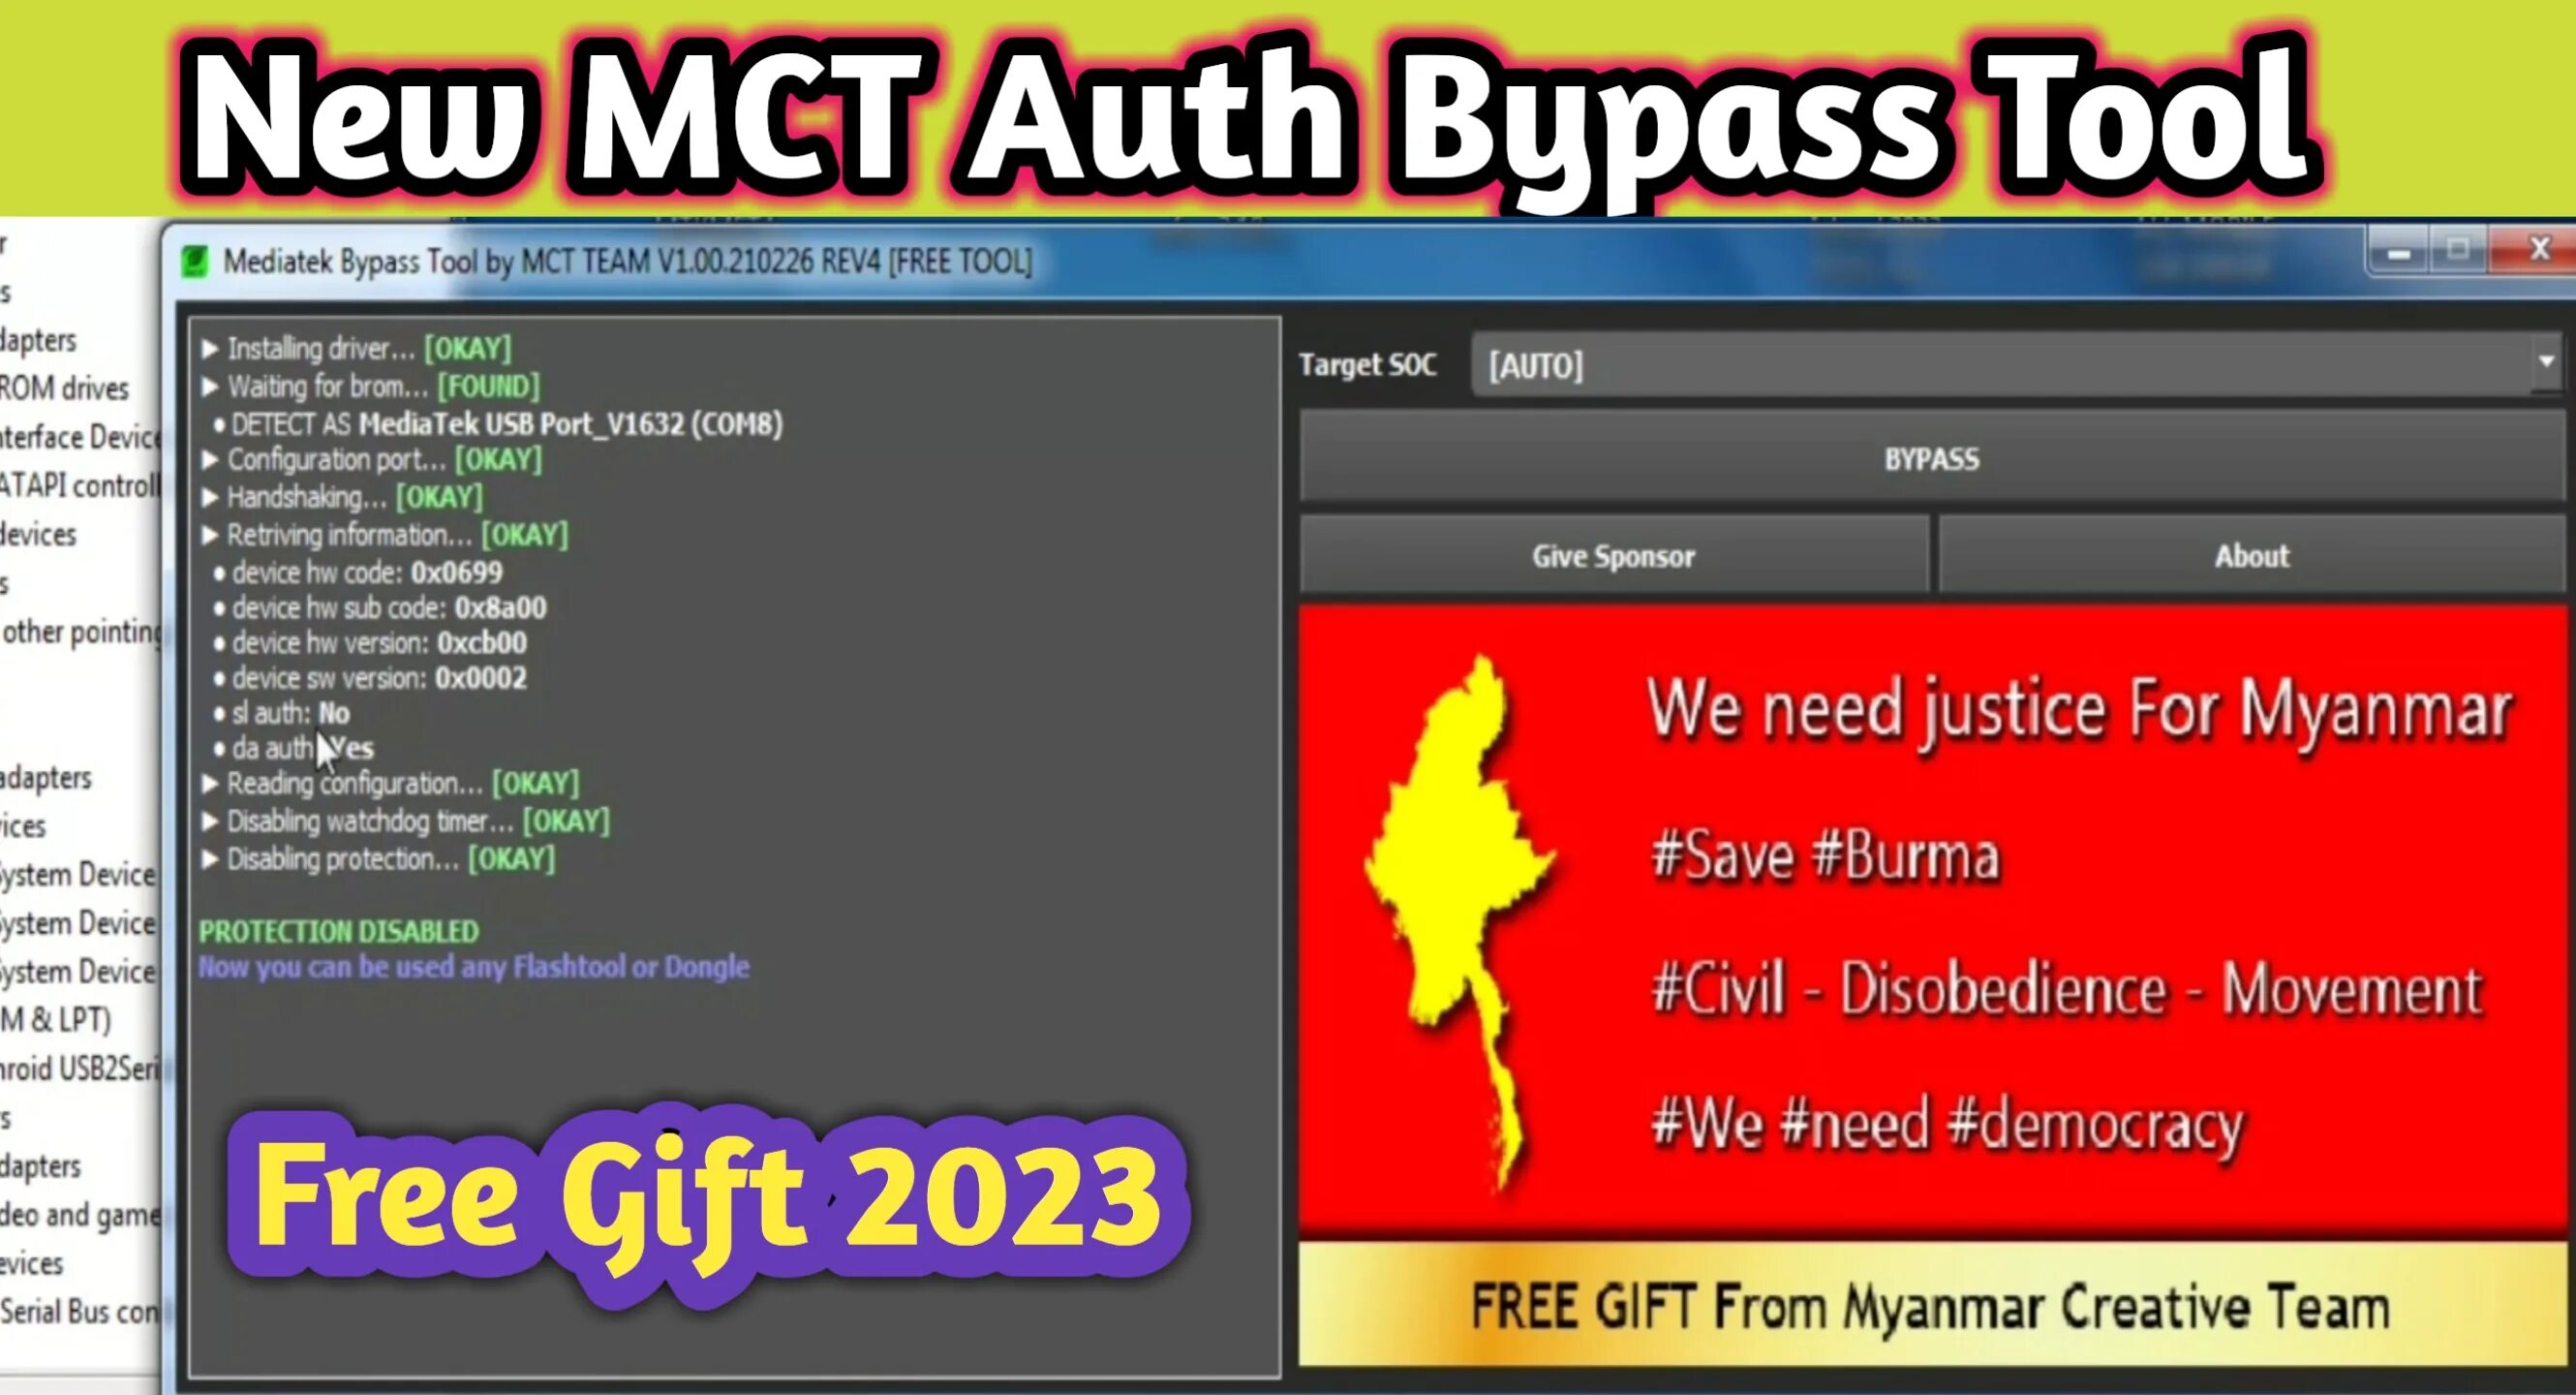 Auth tool. MCT MTK Bypass. MTK Bypass Tool. MTK auth Bypass Tool. MCT Snapdragon auth Bypass Tool.